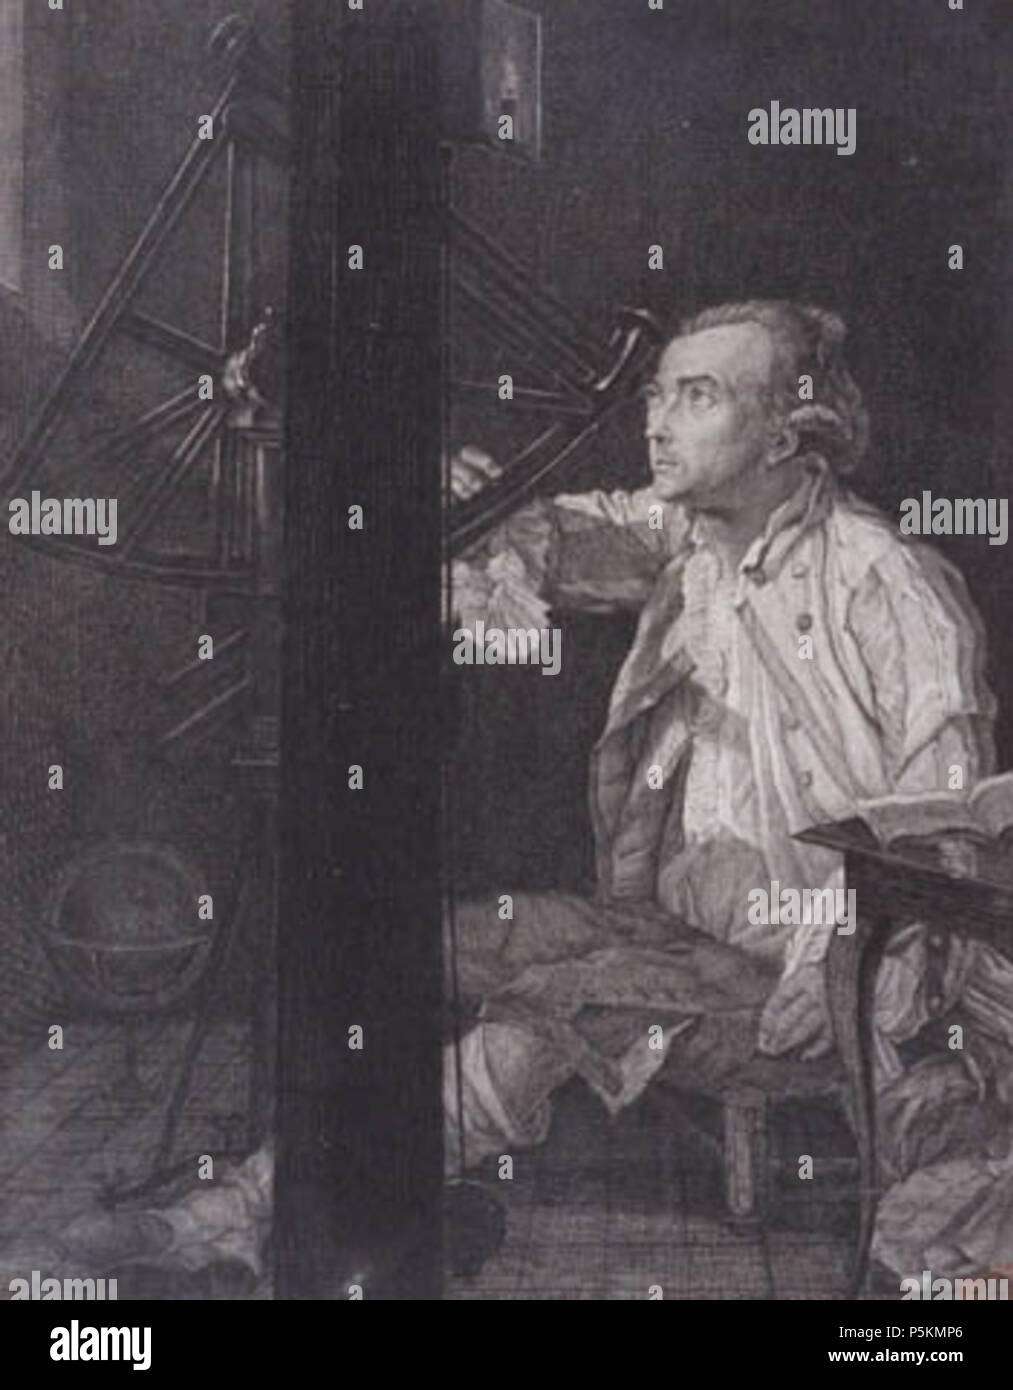 N/A. French astronomer Antoine Darquier de Pellepoix who discovered Ring Nebula (M57) . 1777. G. Vidal 110 Antoine Darquier de Pellepoix Stock Photo